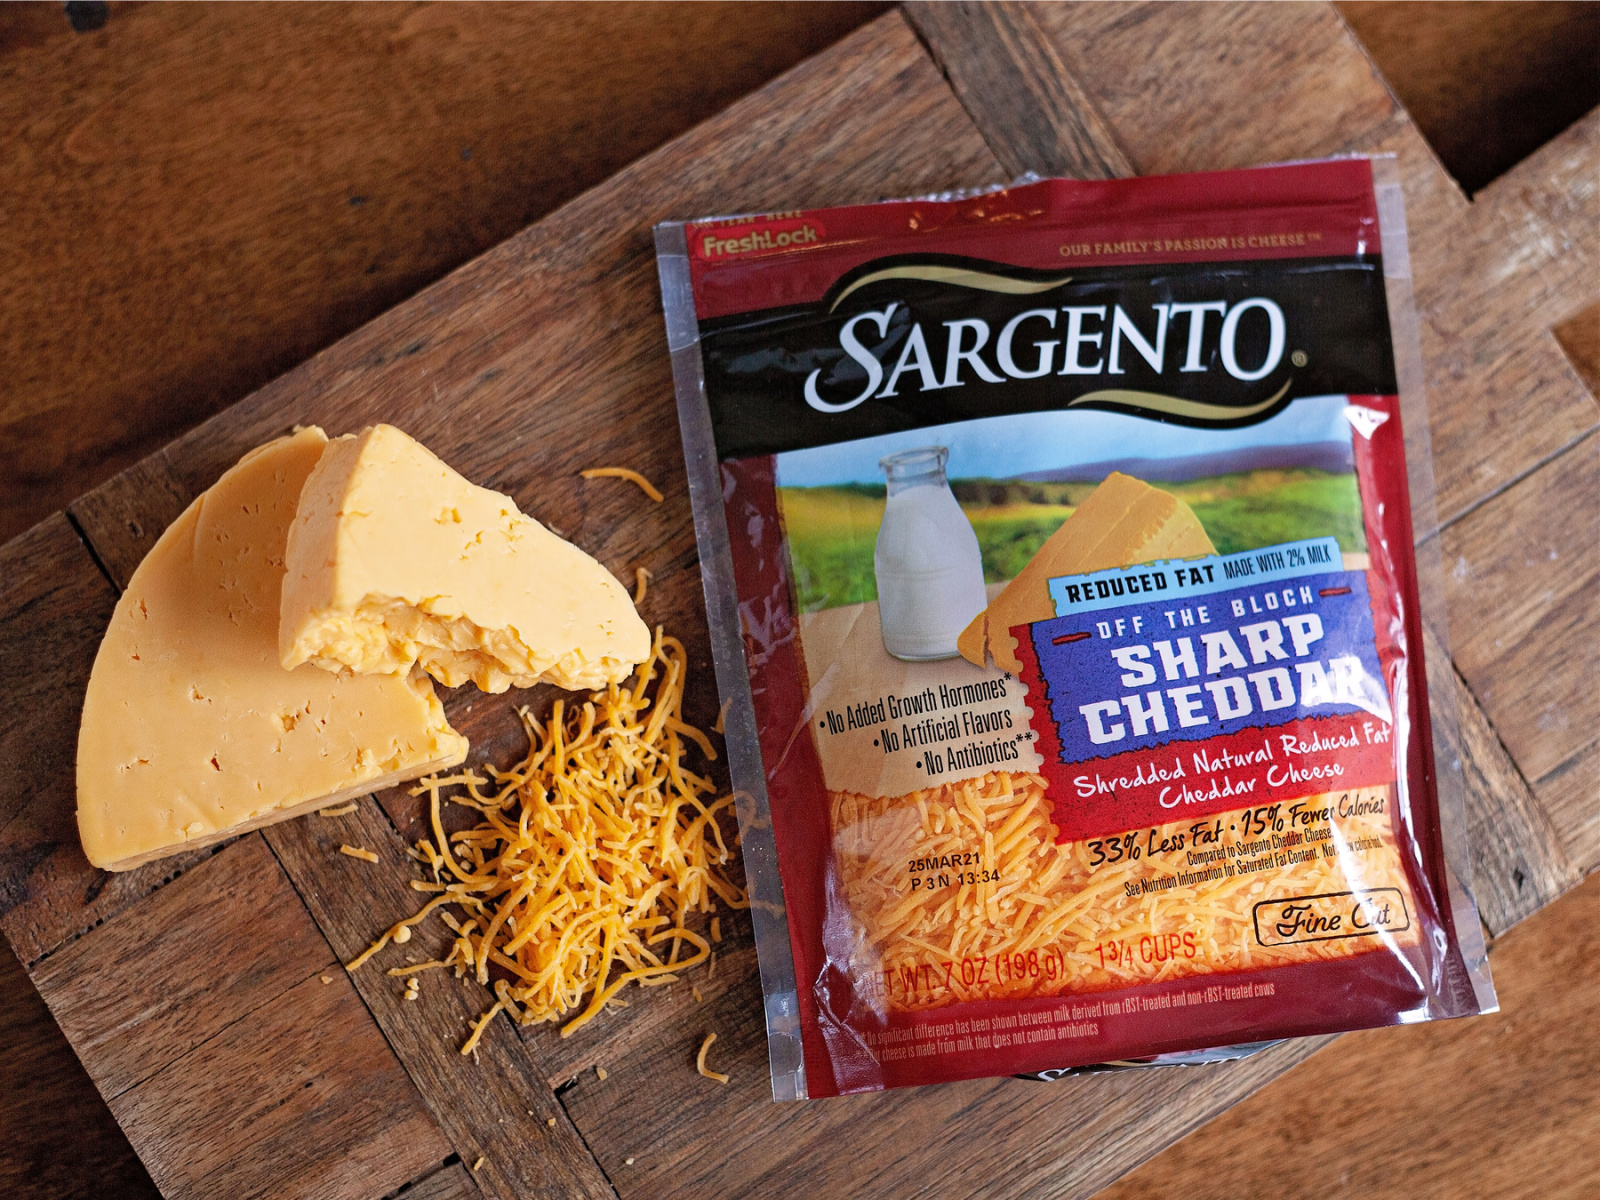 Sargento Shredded Cheese As Low As $2.49 At Kroger (Regular Price $4.79)